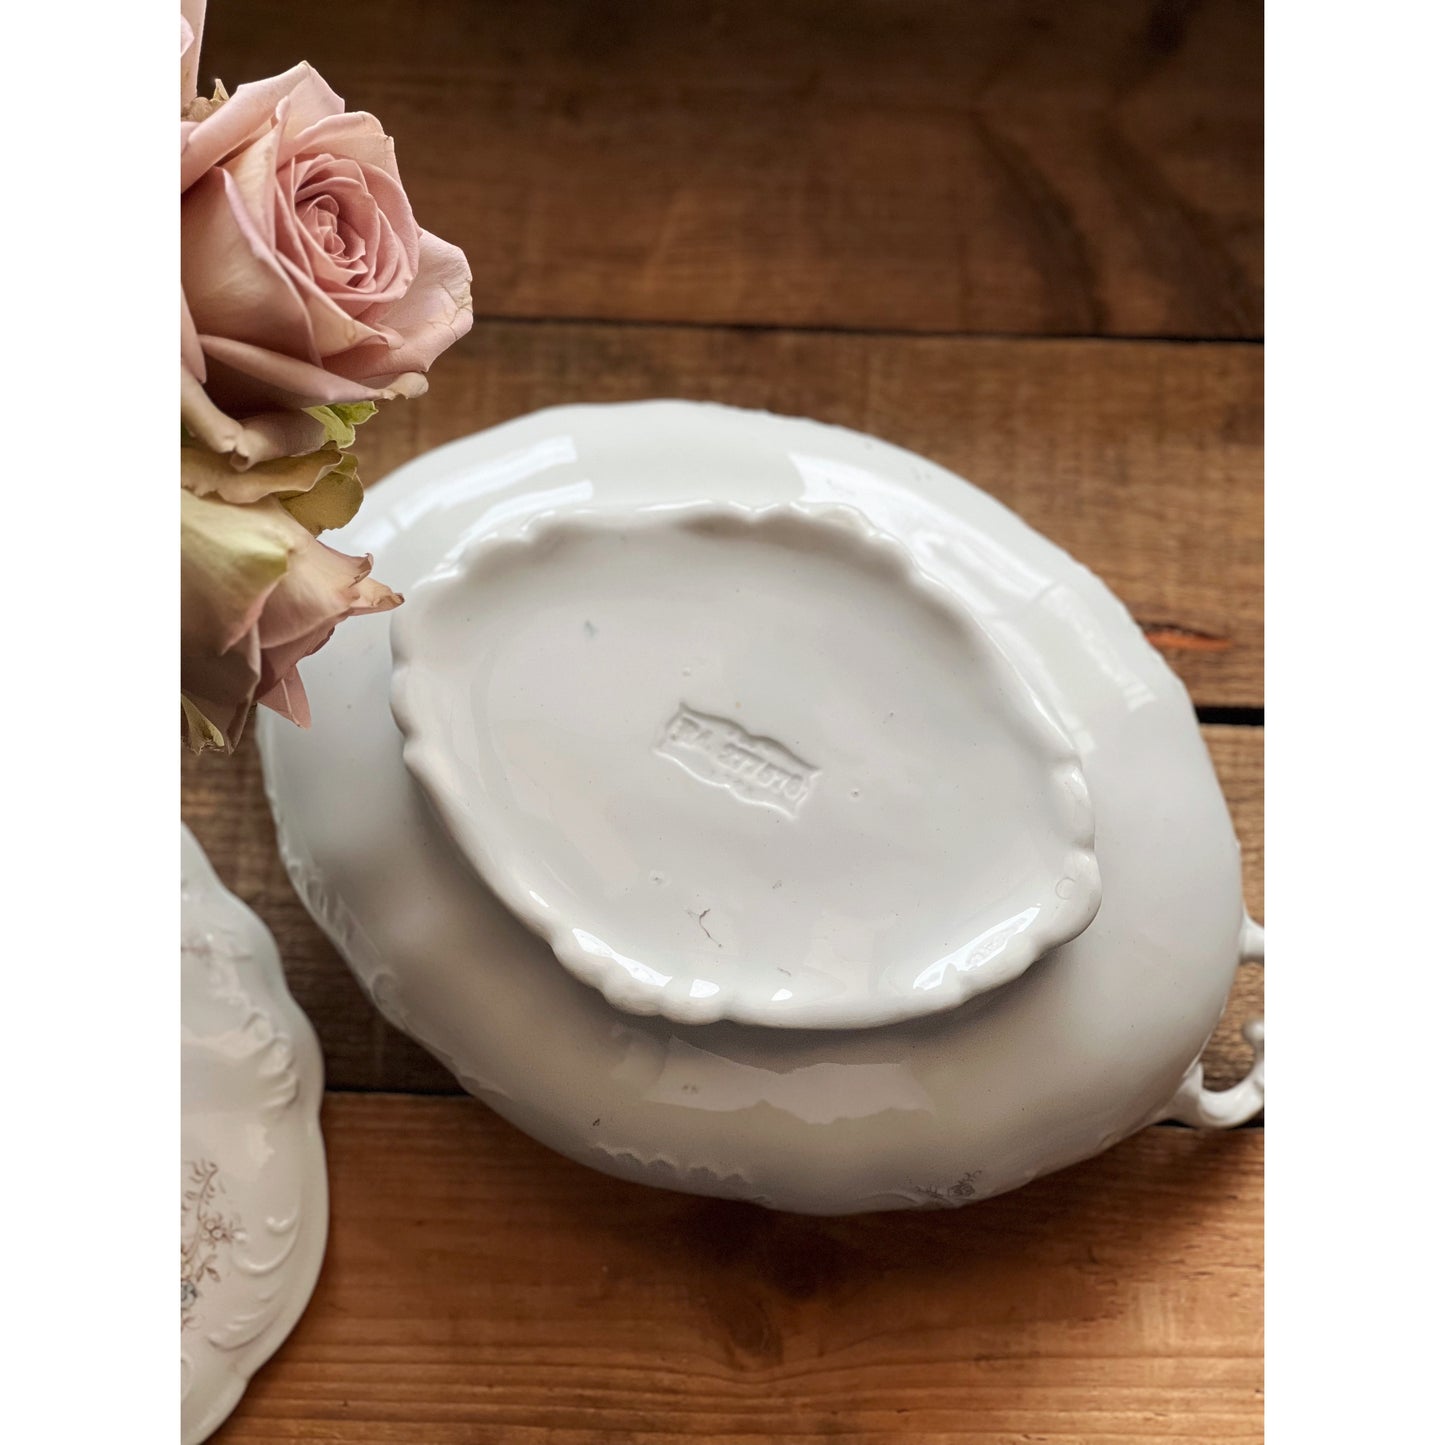 J.H.W. & Sons Victoria Semi Porcelain Oval Covered Vegetable Dish